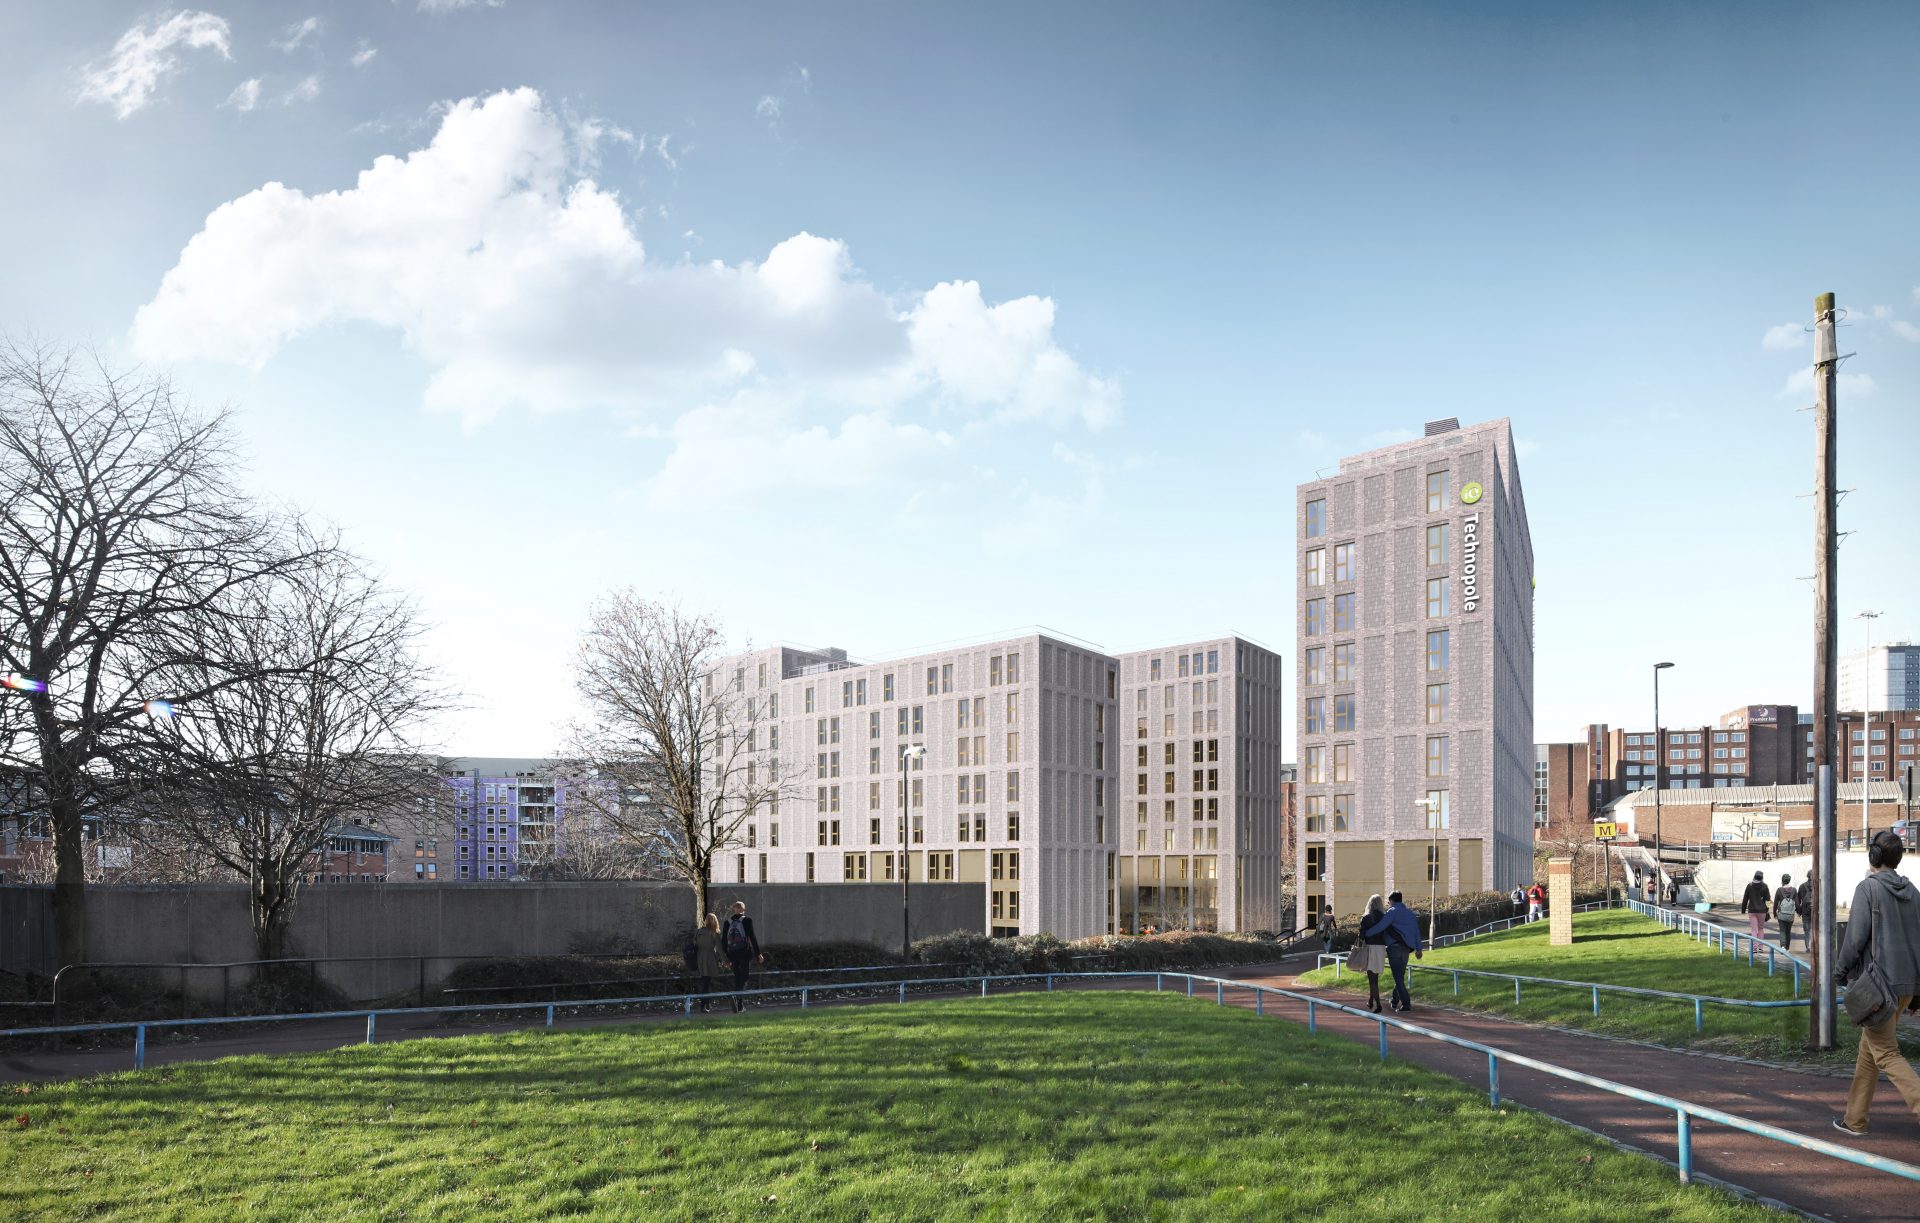 £40m residential development approved by city planners